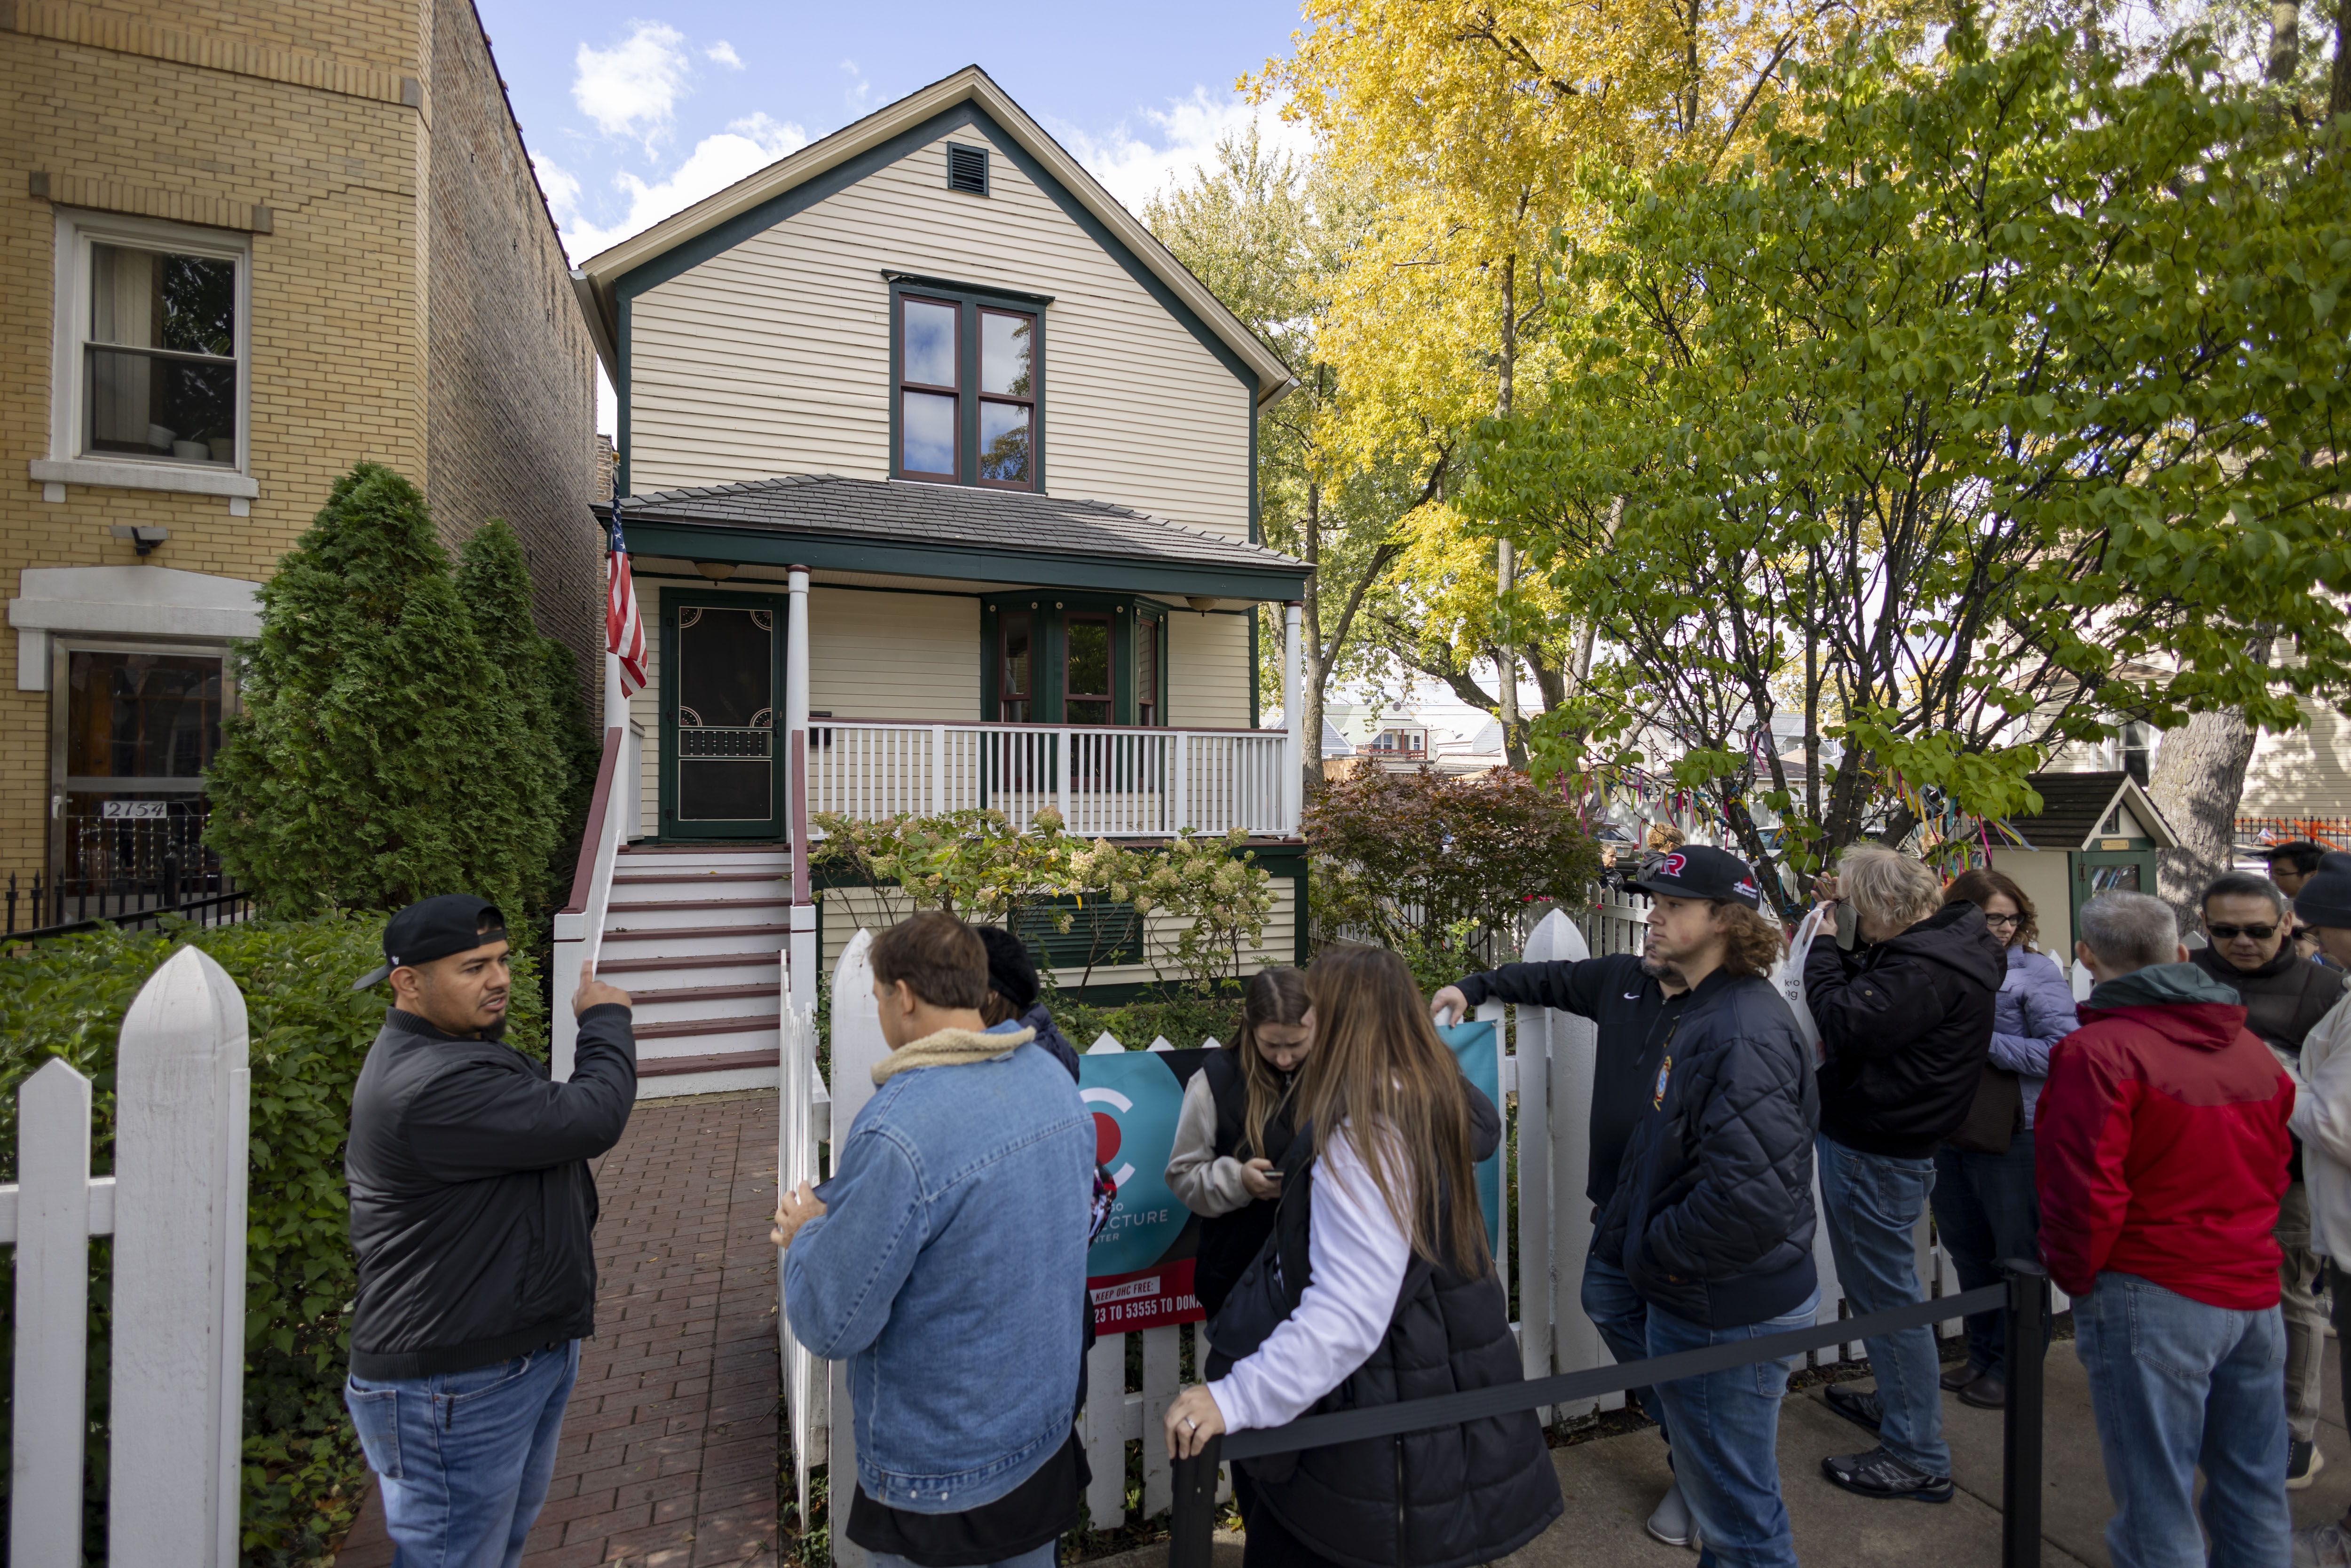 Walt Disney's Childhood Home in Chicago Open to Public for First Time